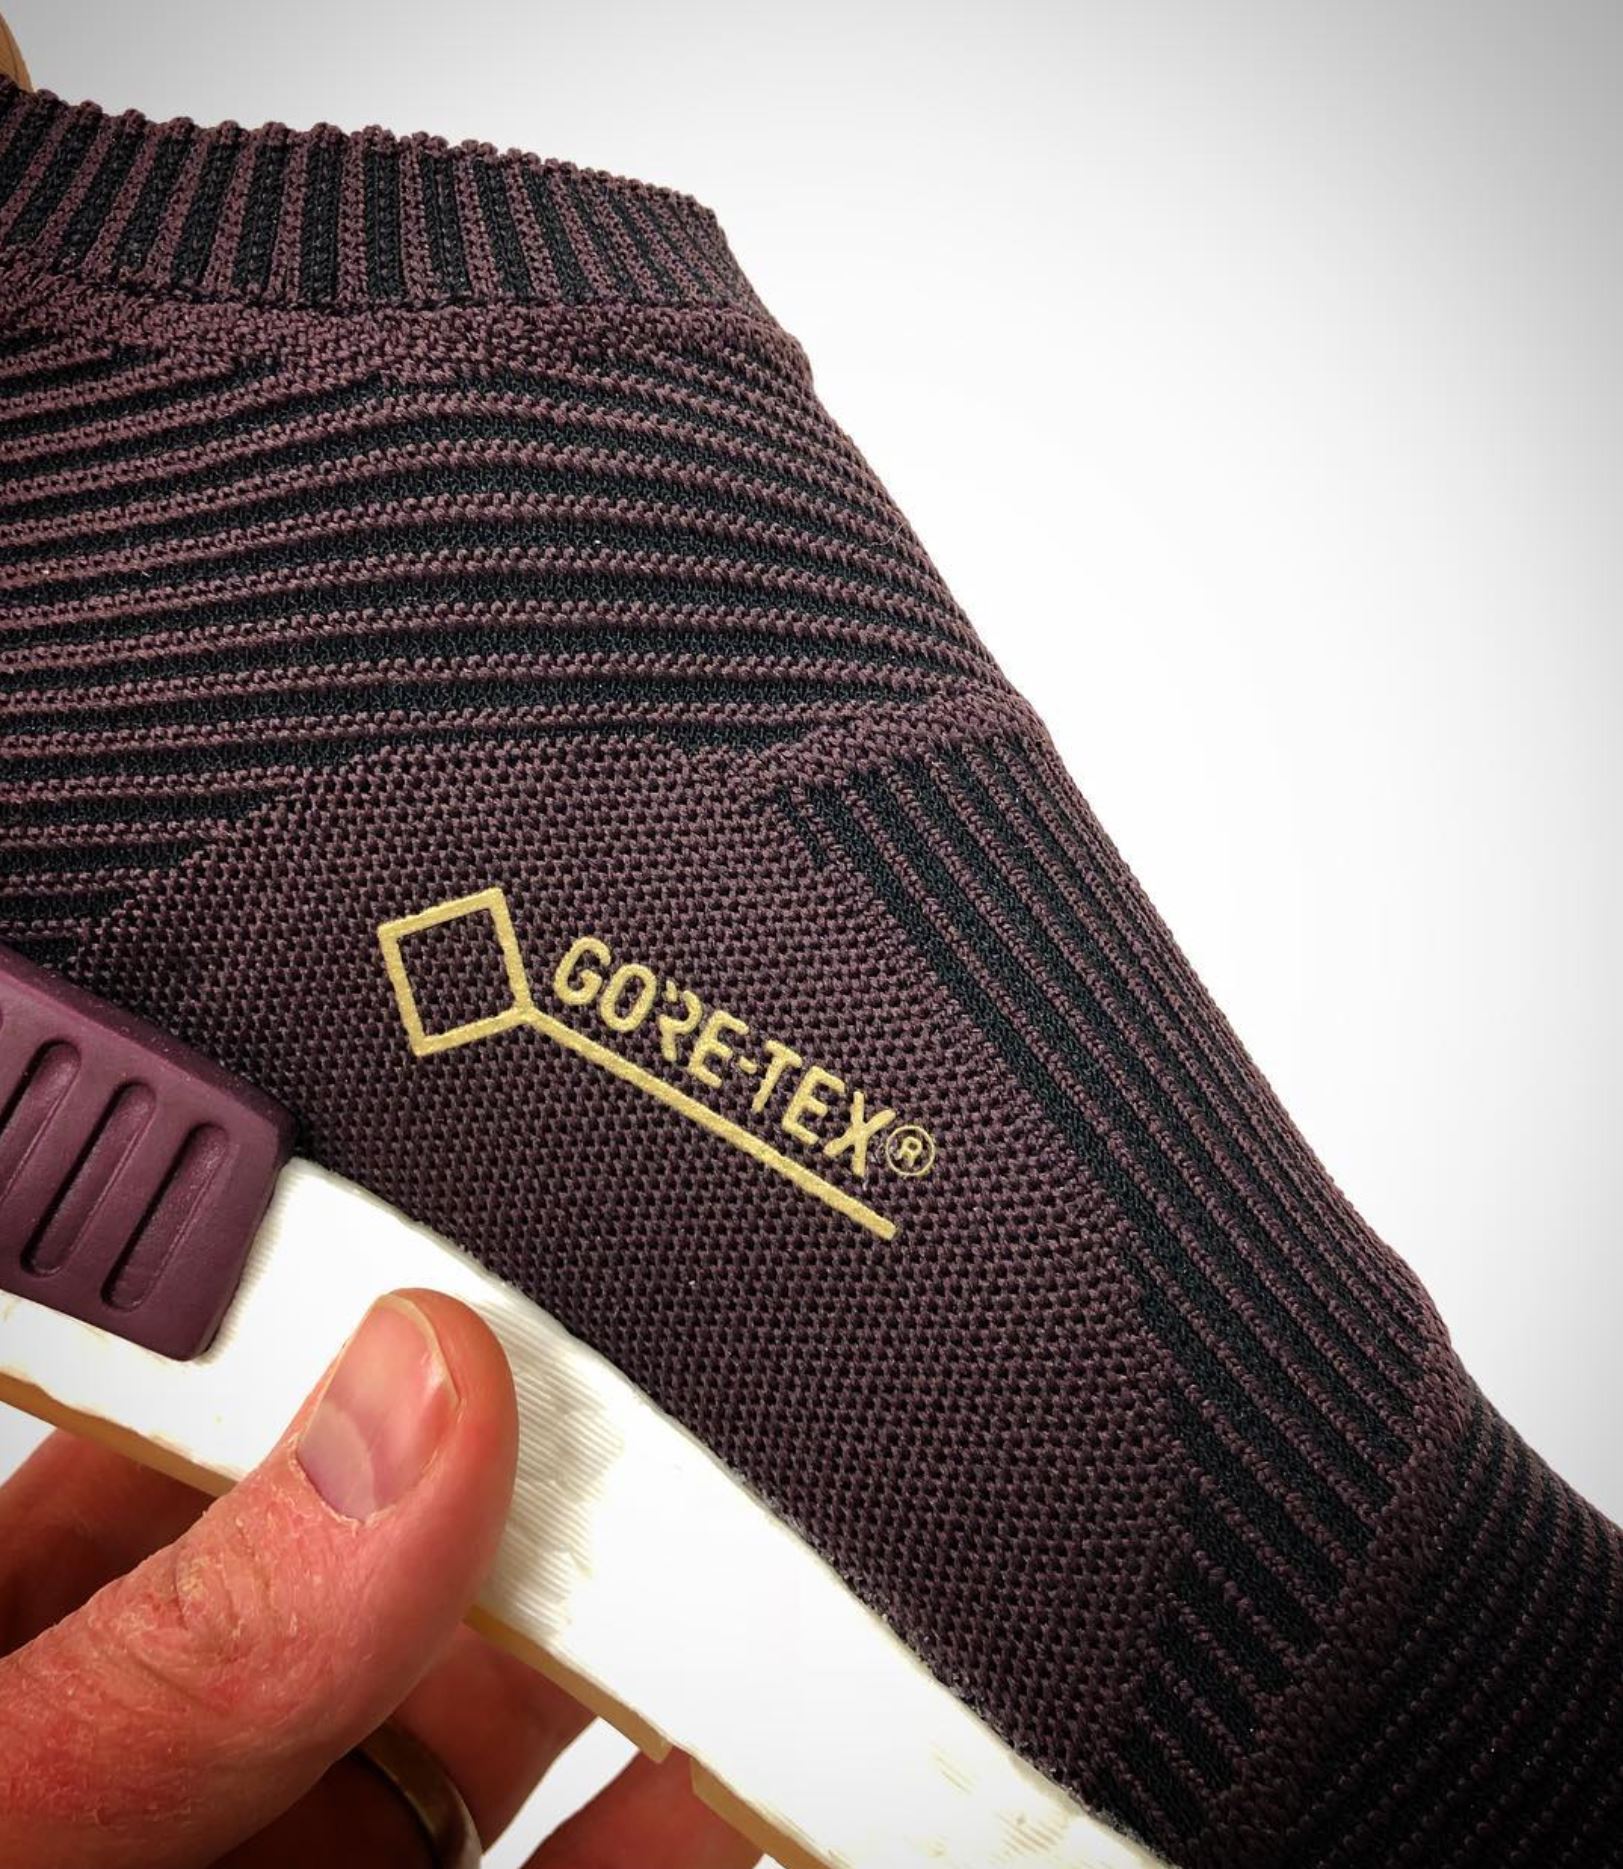 Sneakersnstuff Has a Gore-Tex adidas NMD CS2 Collab Coming - WearTesters